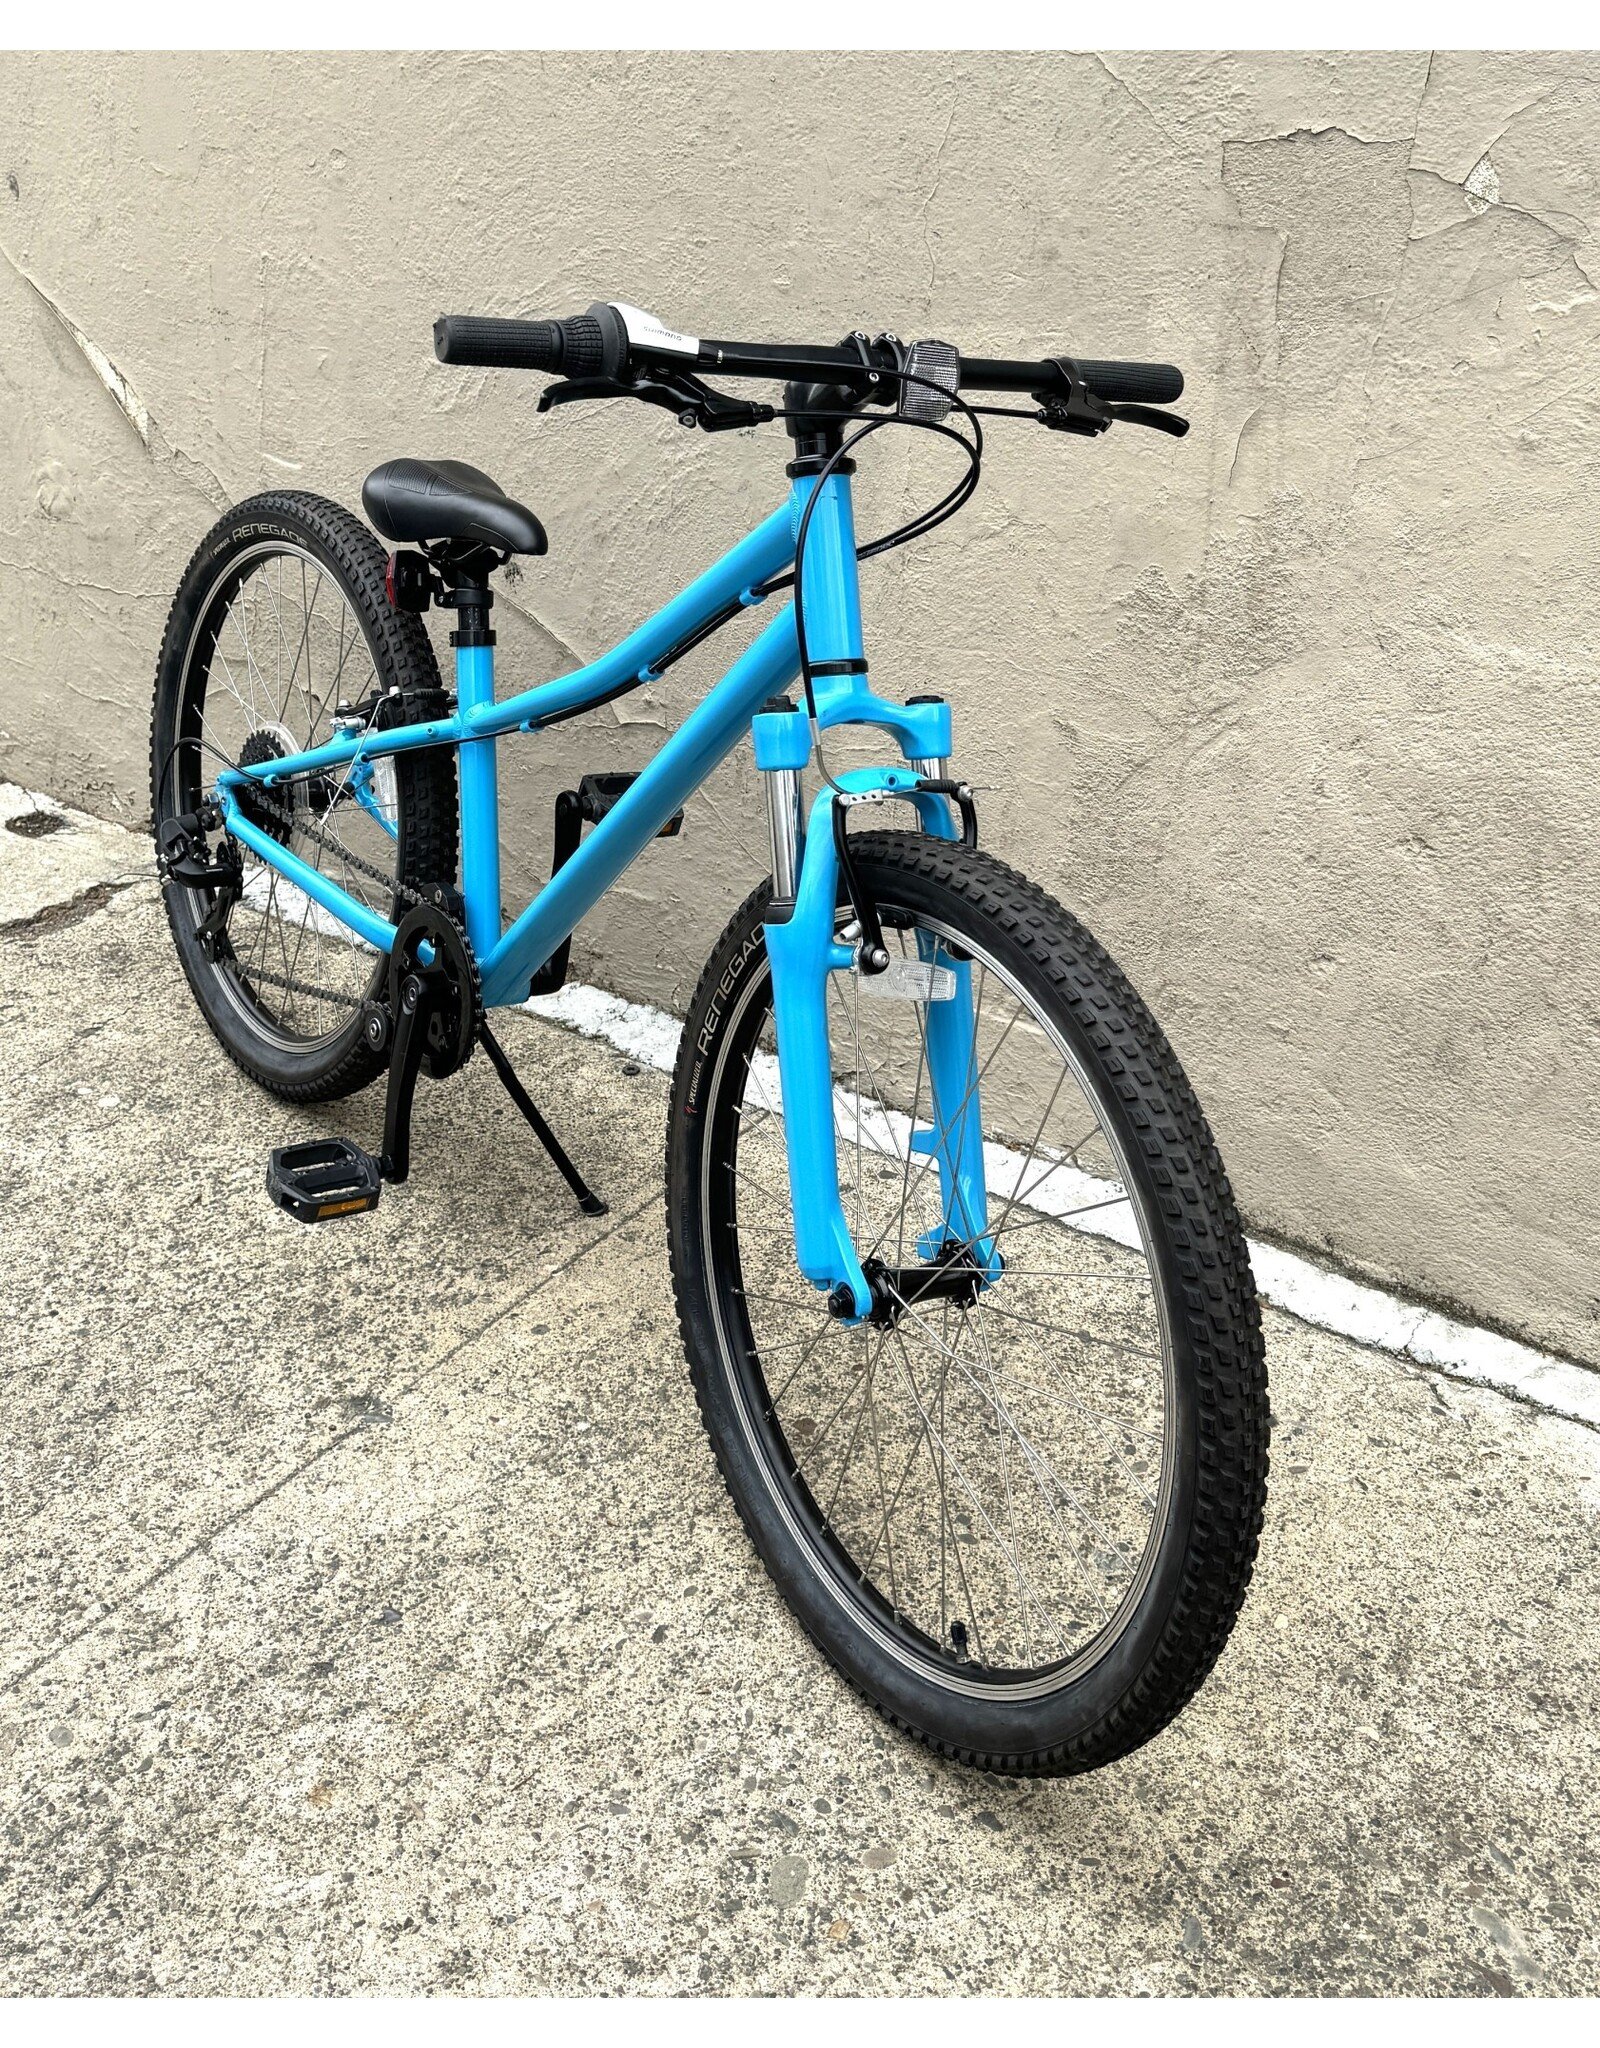 Specialized Specialized Hotrock 24 Youth,  12 Inches, Teal